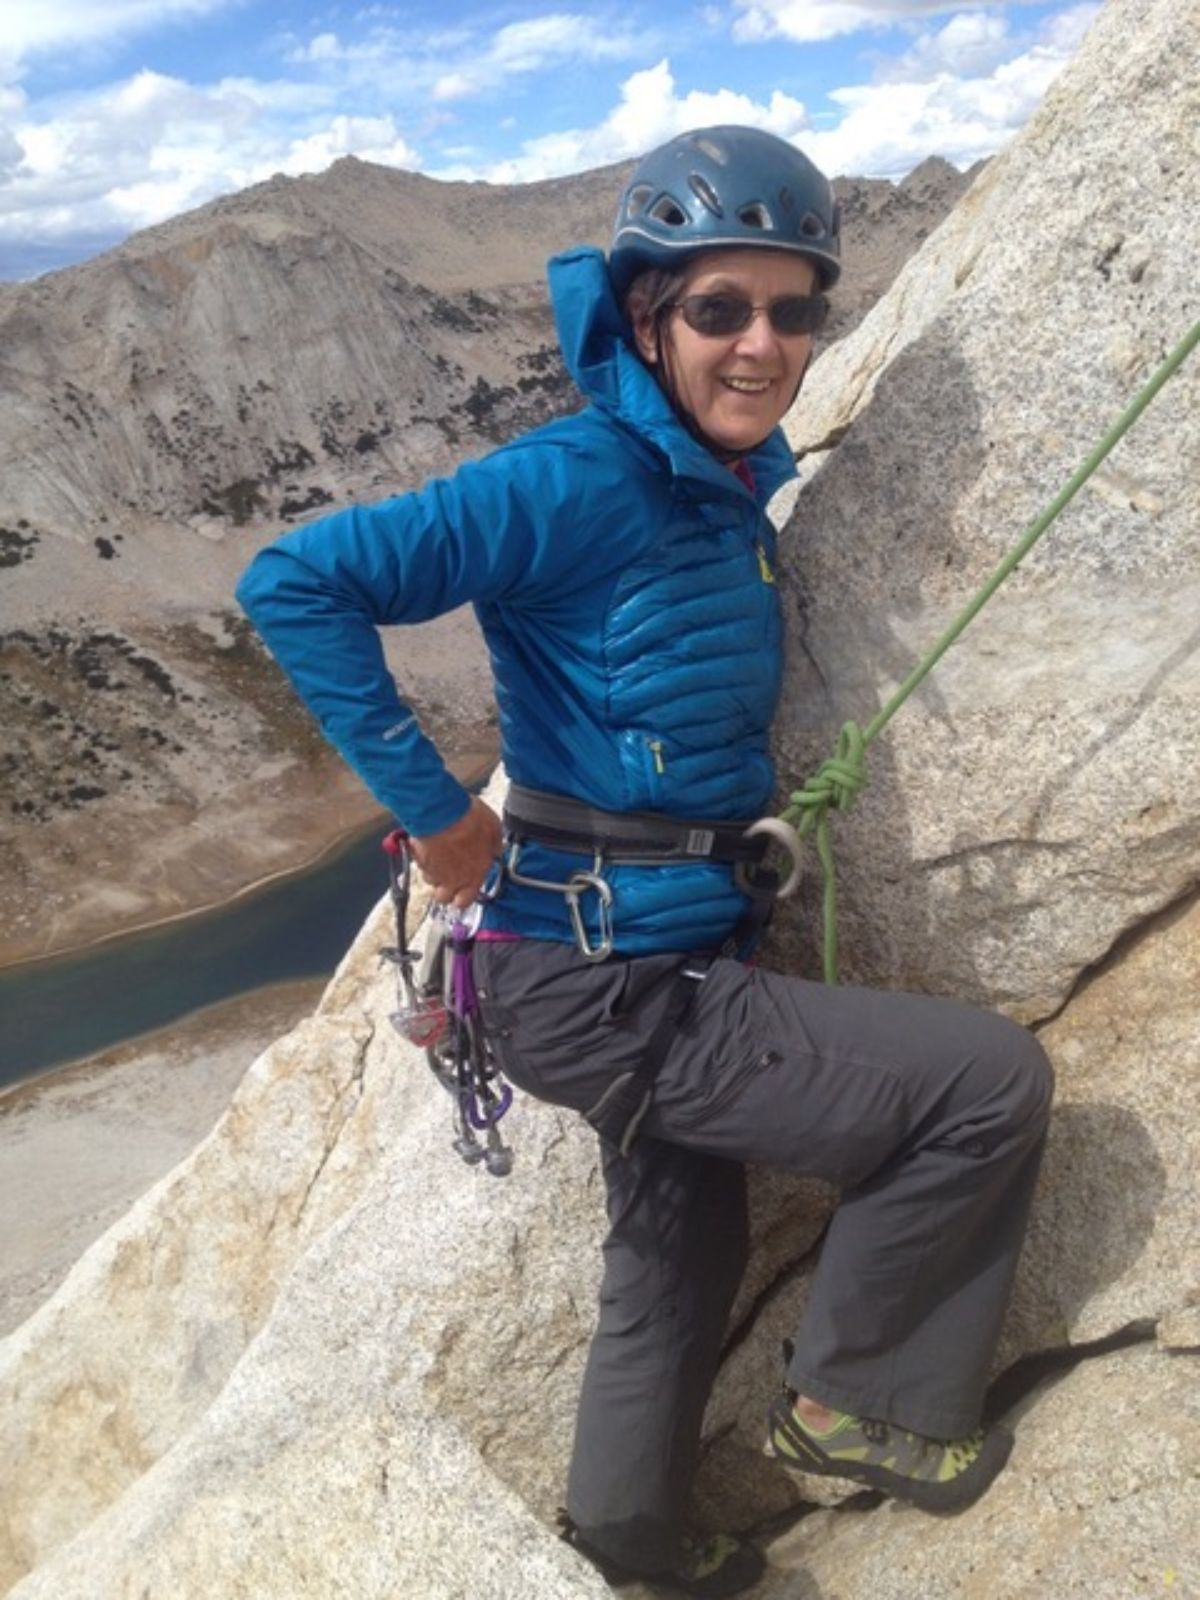 wolownick enjoying a beautiful day on mount conness in the sierra nevada range